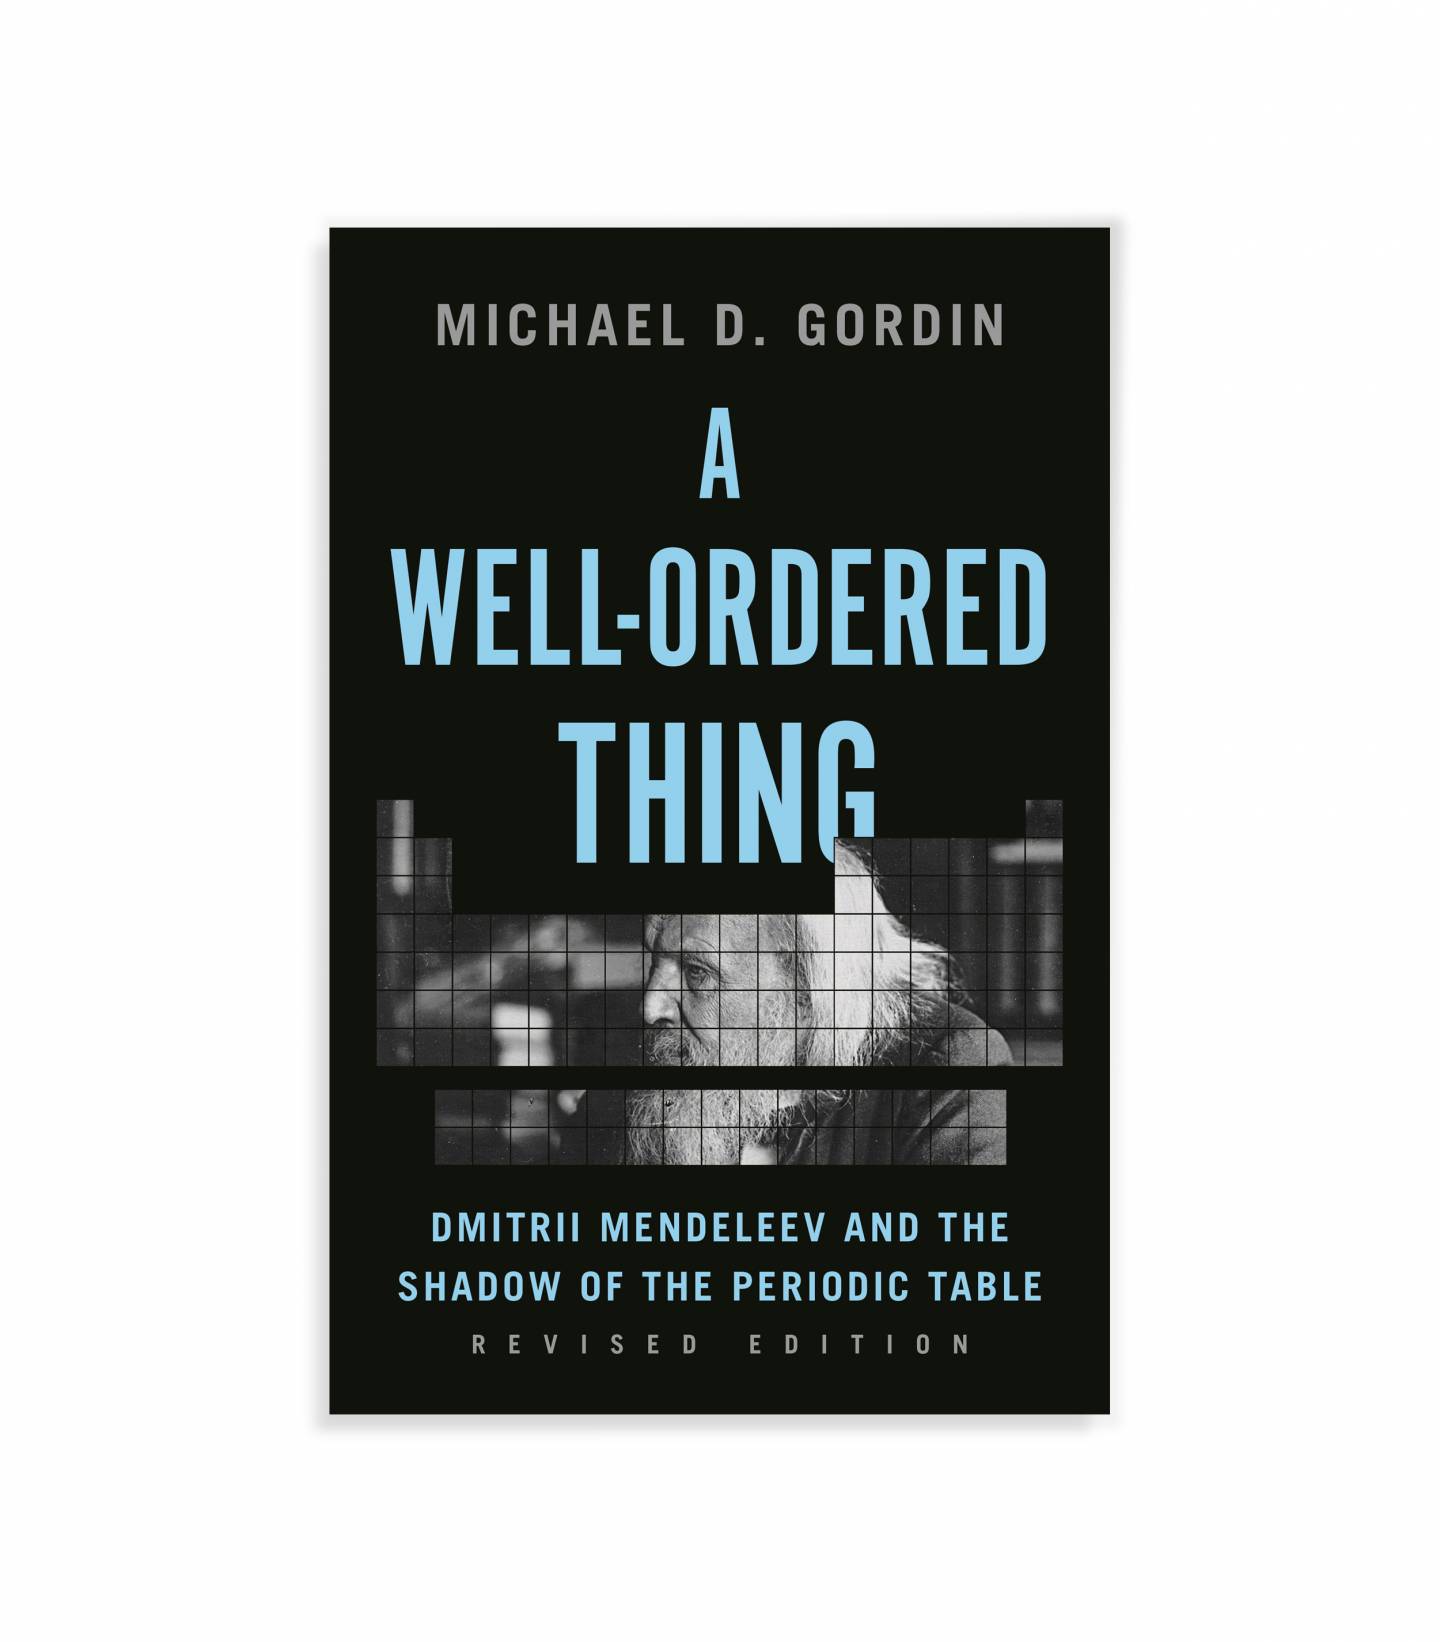 Book cover, title: A Well-Ordered Thing: Dmitrii Mendeleev and the shadow of the periodic table, revised edition. By Michael D. Gordin